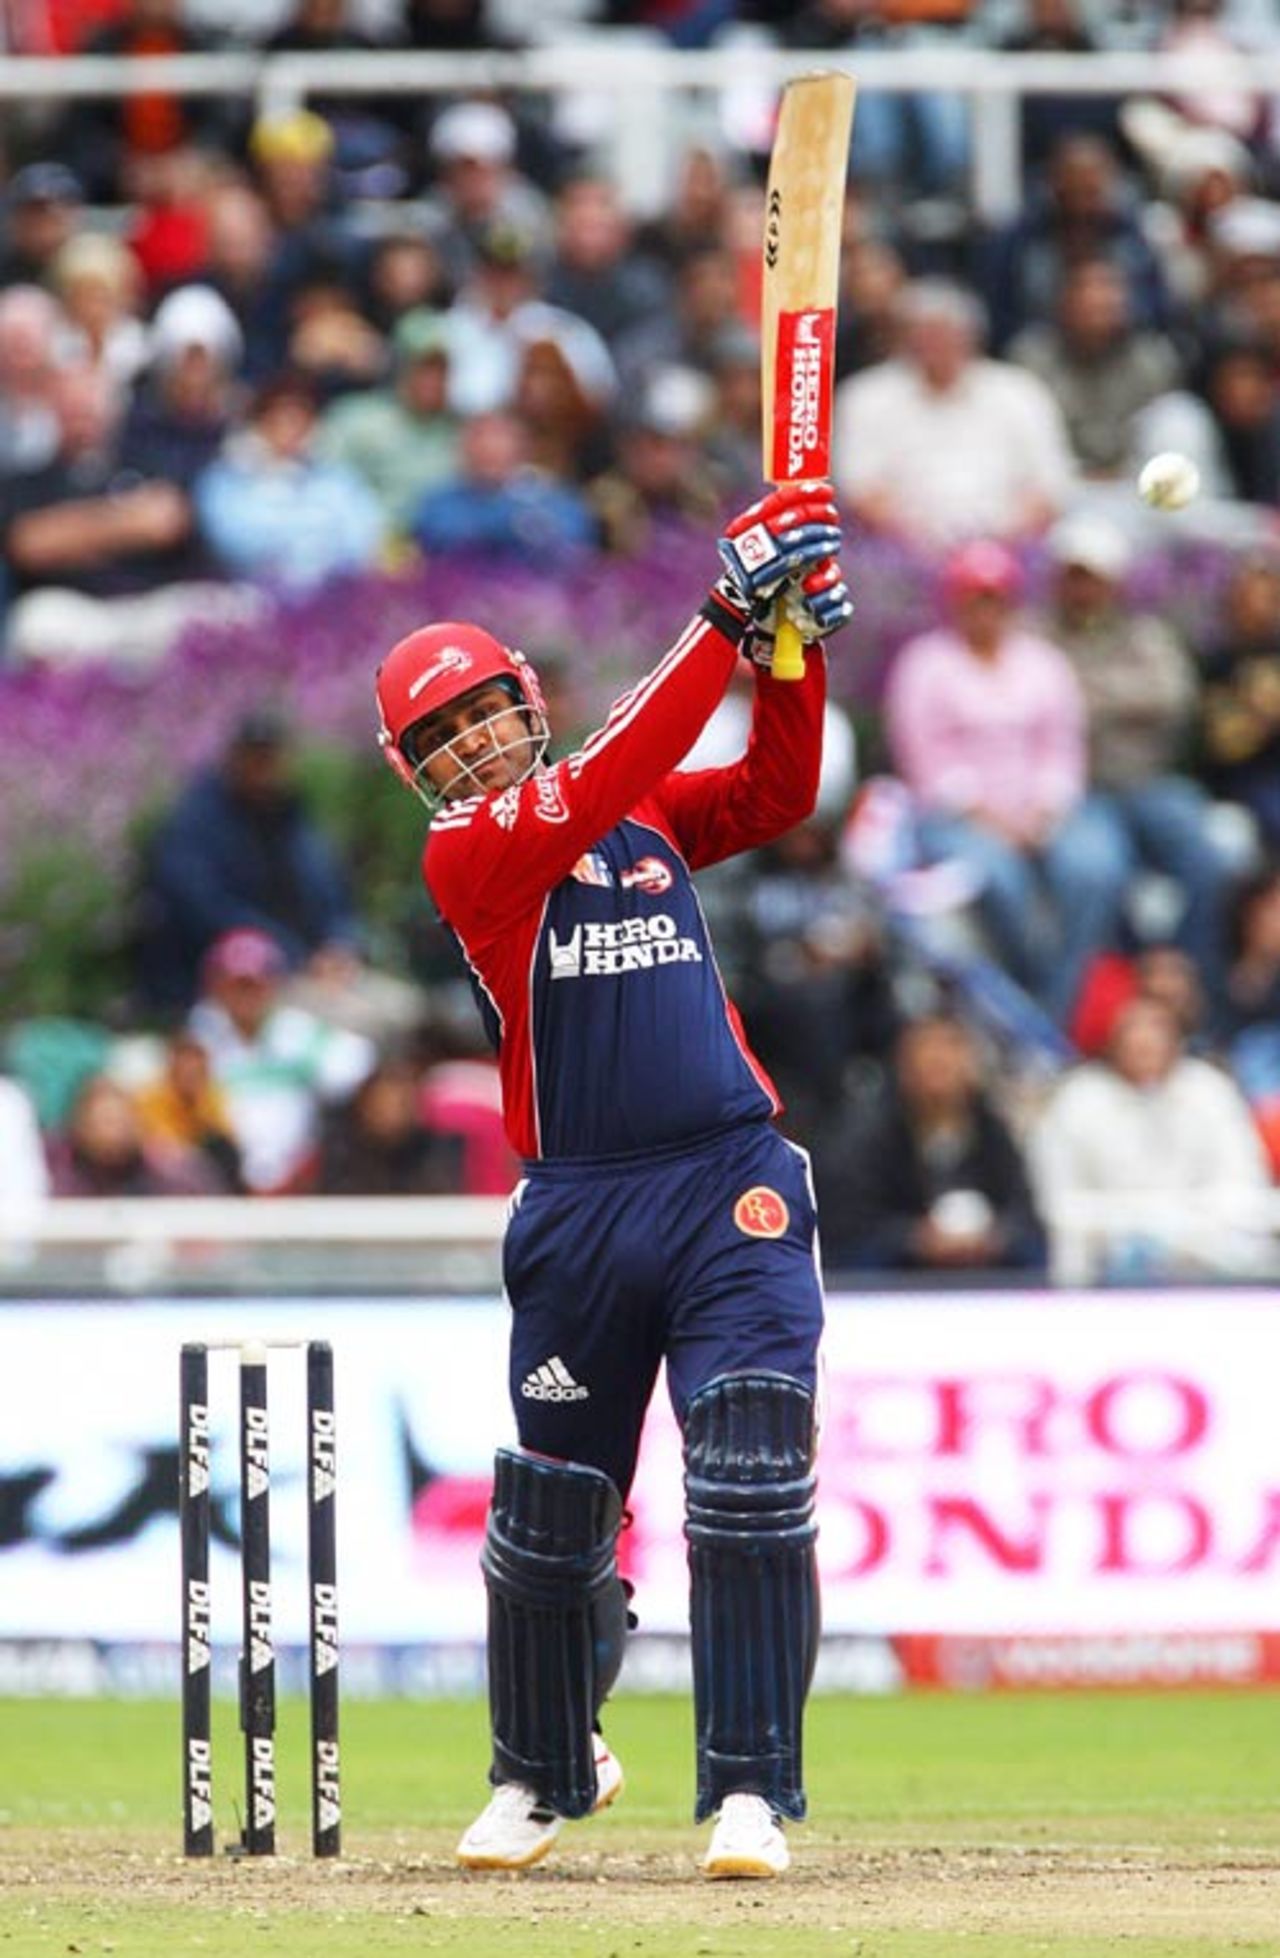 Virender Sehwag launches the ball over the bowler's head, Delhi Daredevils v Kings XI Punjab, IPL, 3rd game, Cape Town, April 19, 2009